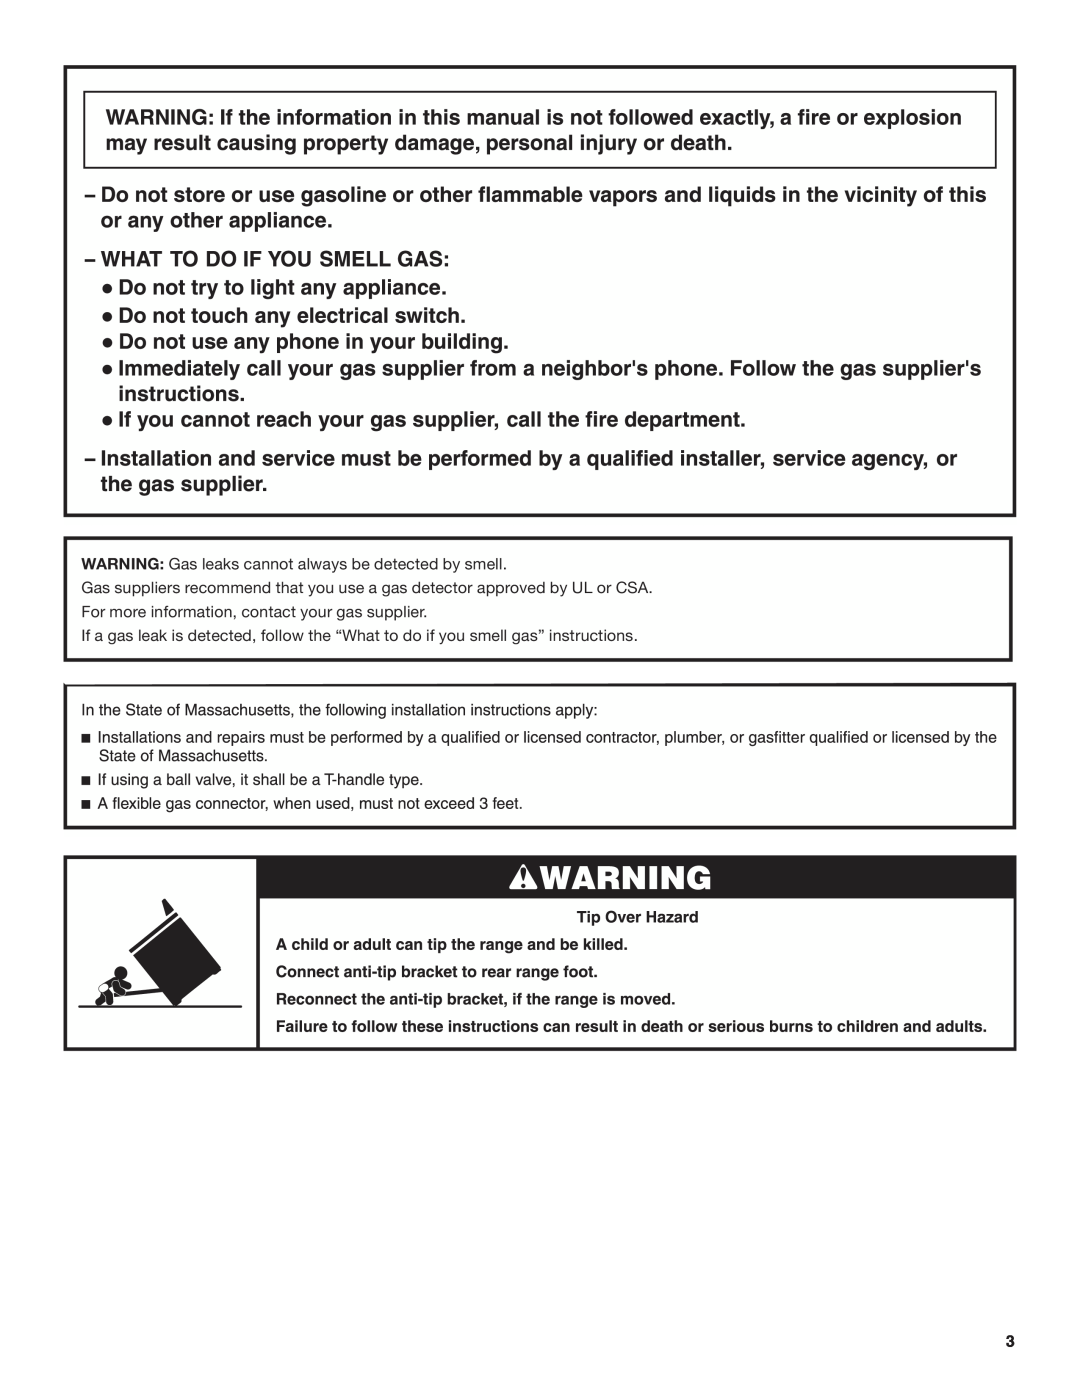 Amana AGG222VDW installation instructions WARNING: Gas leaks cannot always be detected by smell 